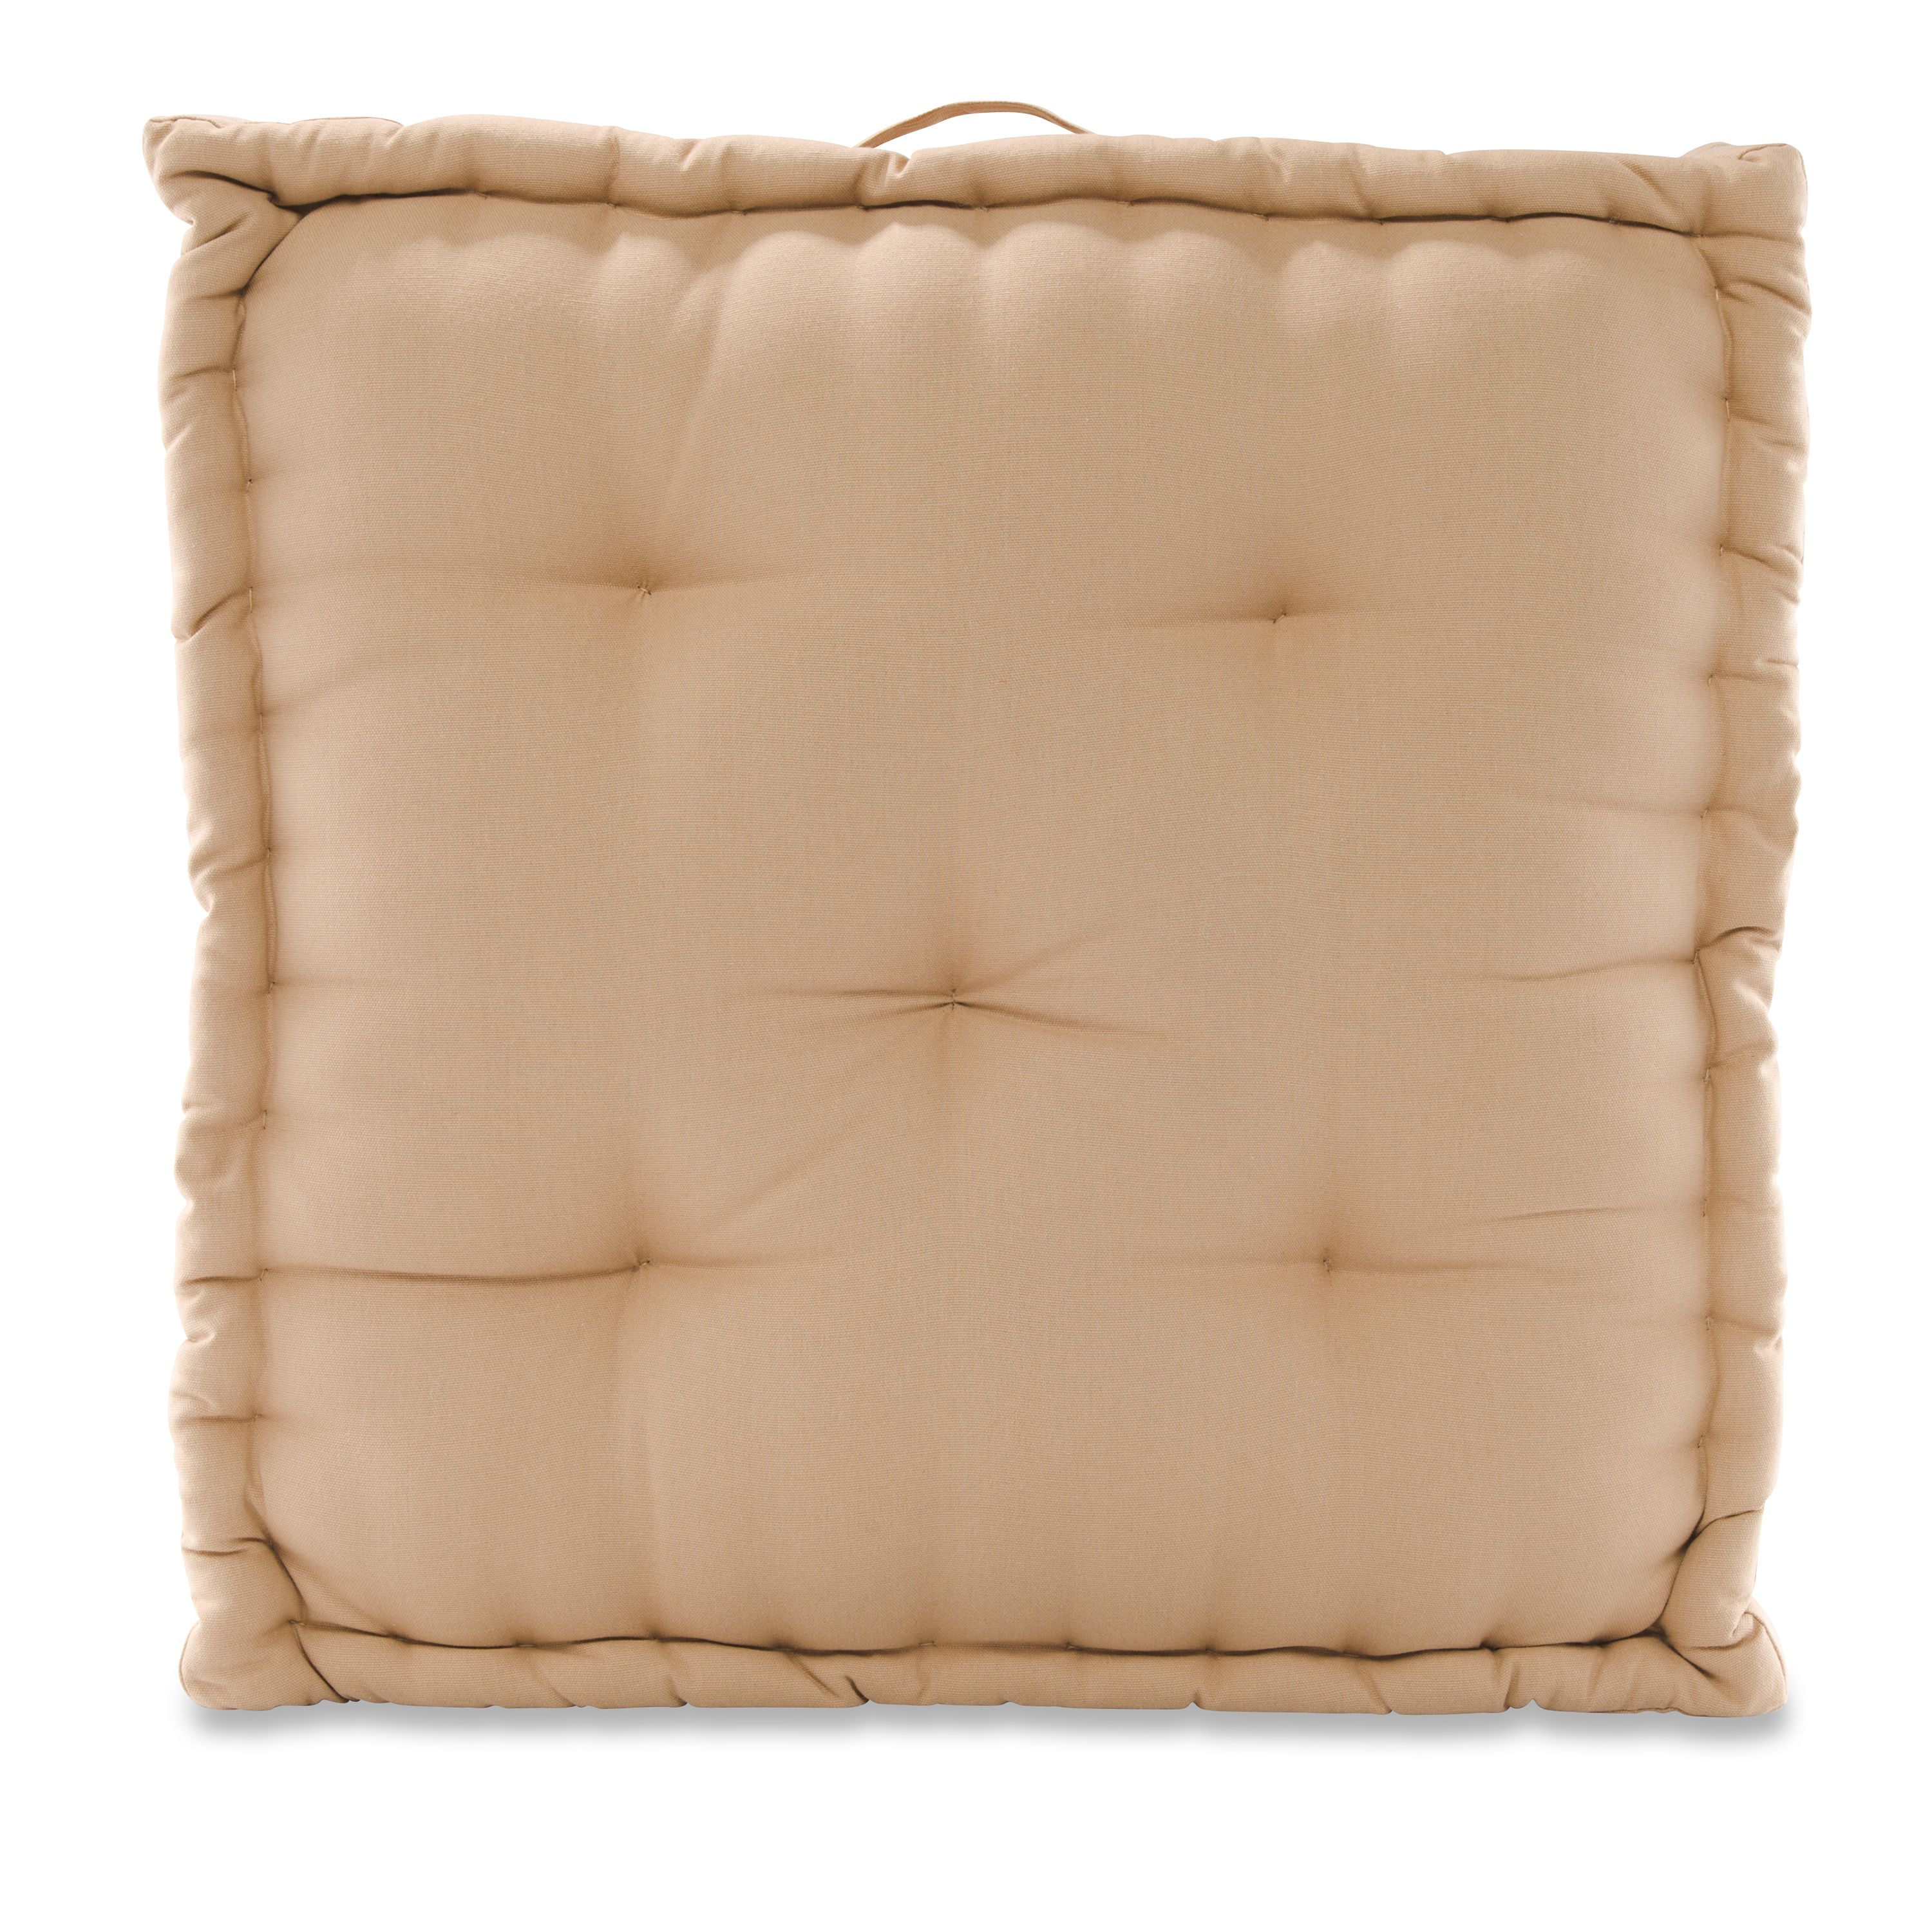 Better Homes & Gardens Tufted Square Floor Cushion, Size 24" x 24", Vanilla Bean - image 1 of 4